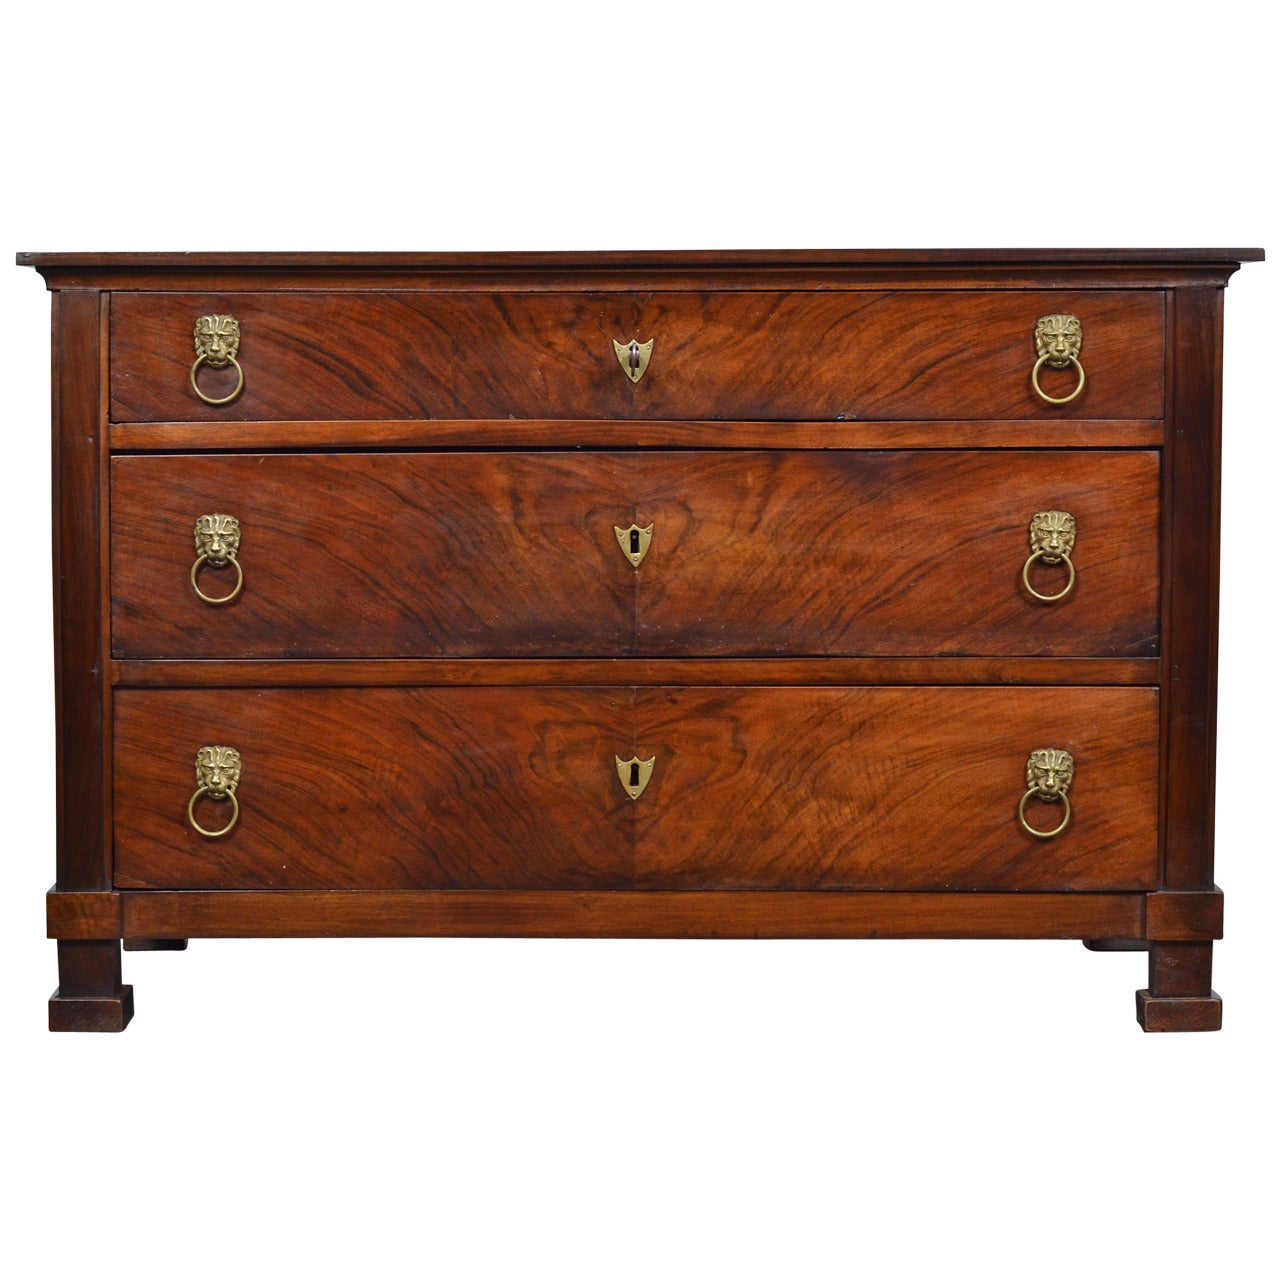 French Empire Period Walnut Commode